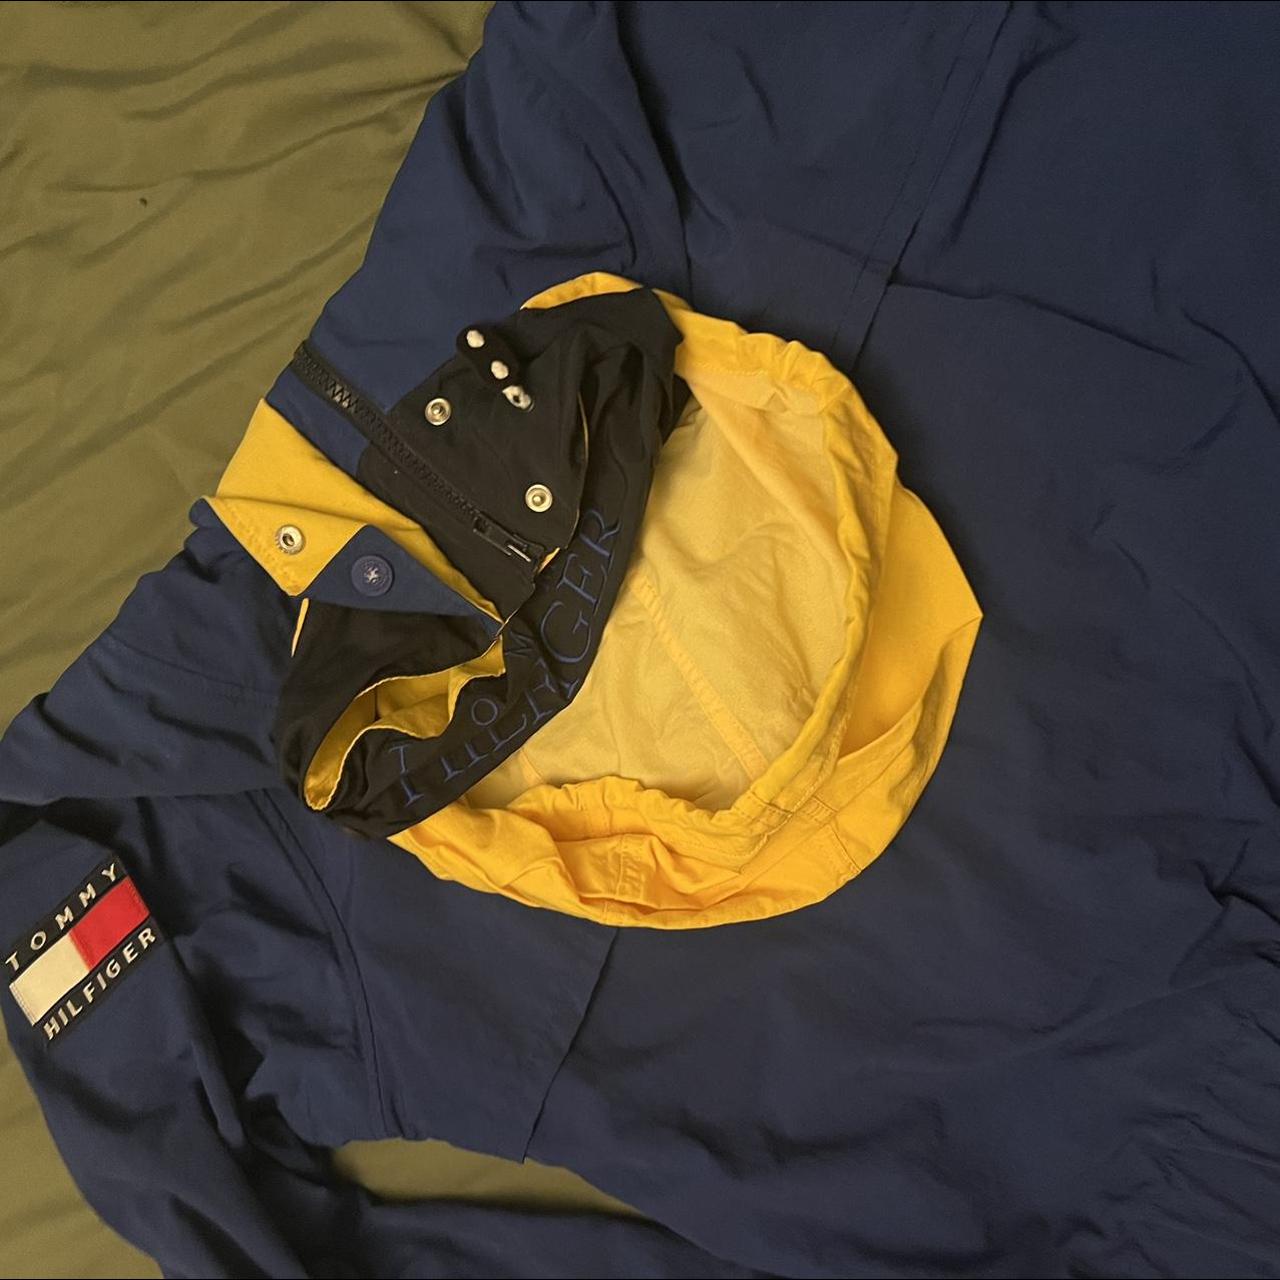 Tommy Hilfiger Men's Blue and Yellow Jacket (4)